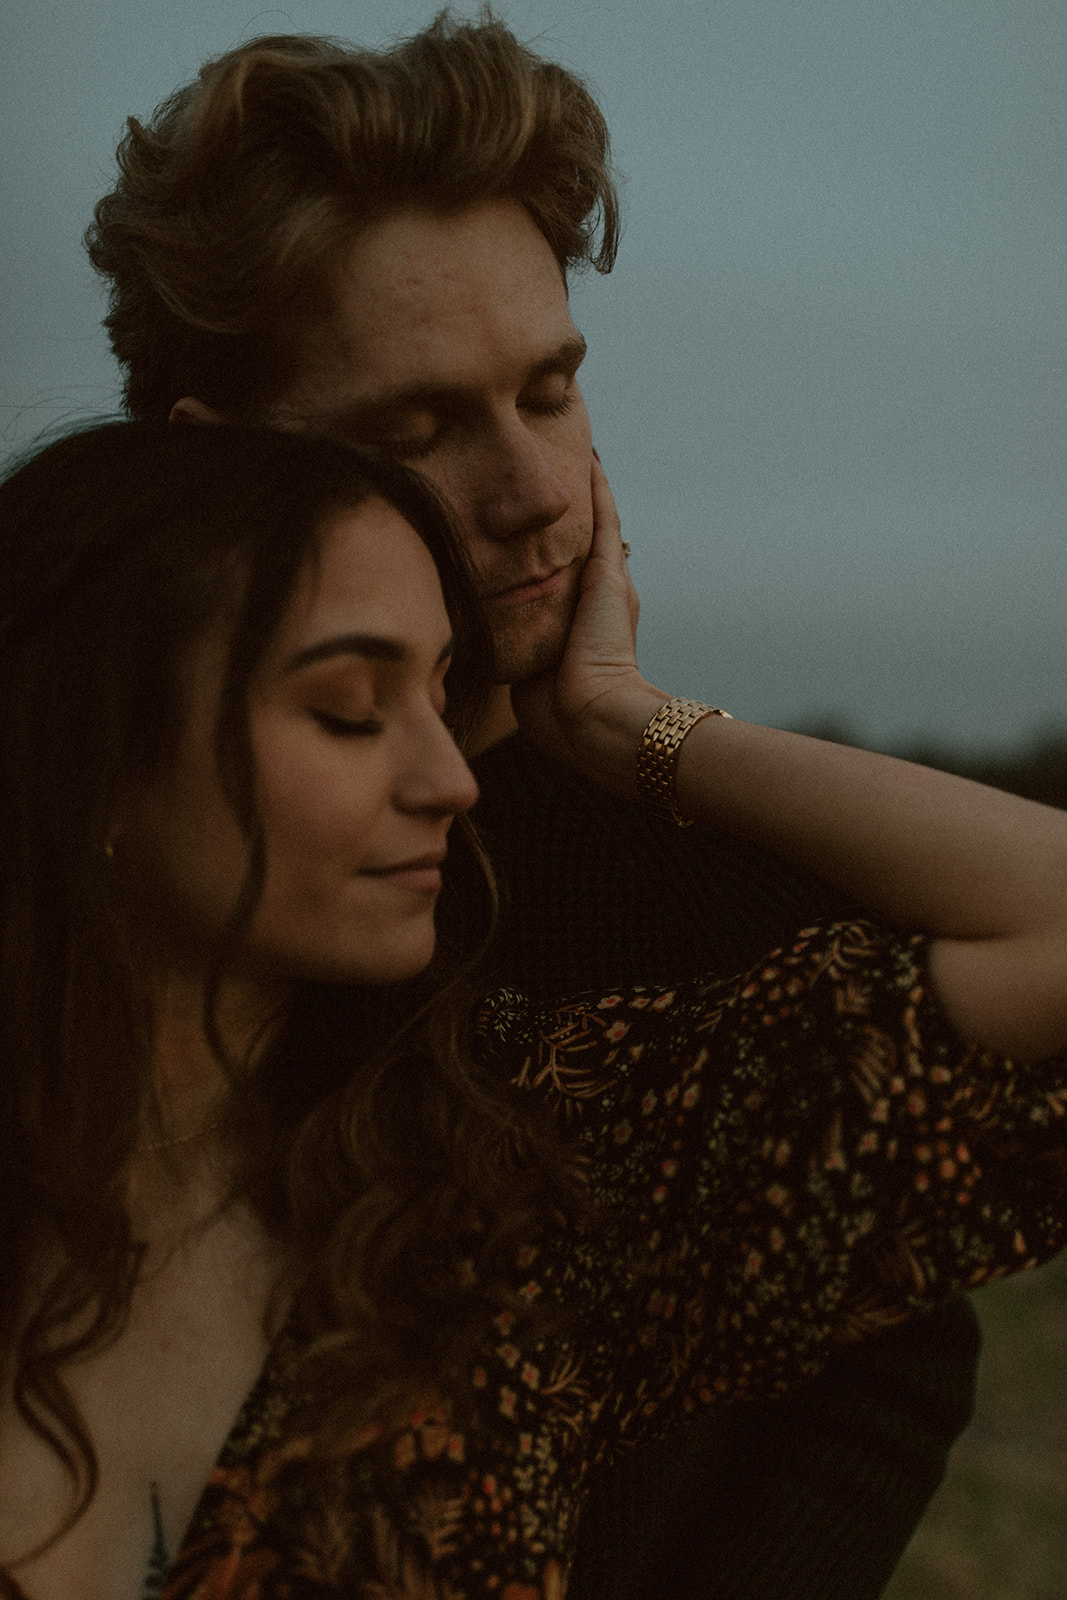 Moody engagement session shot by Sullivan Taylor